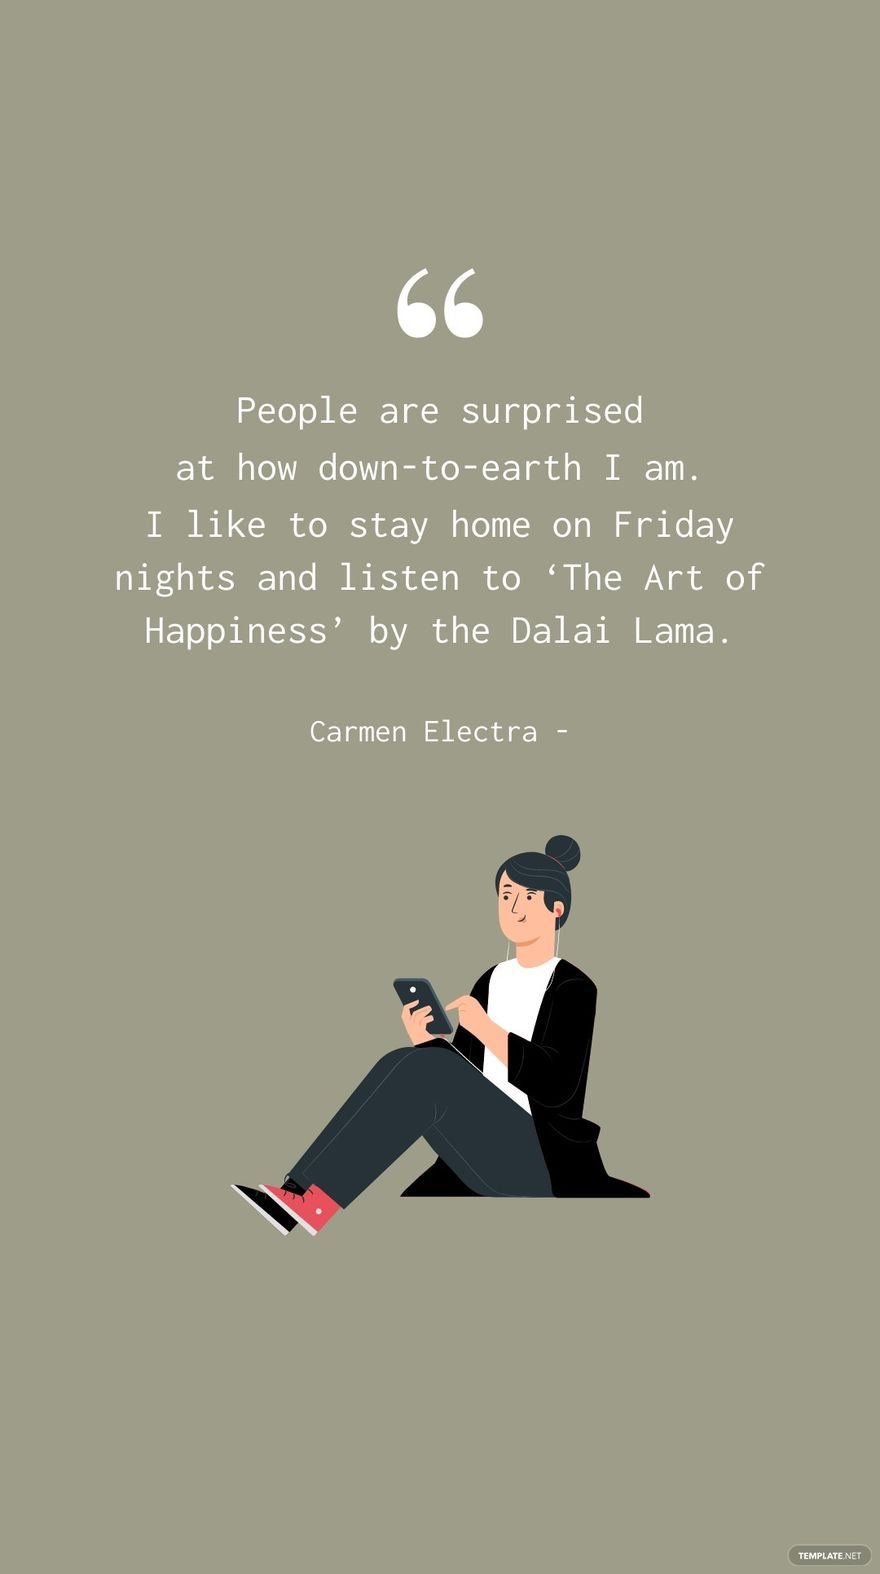 Carmen Electra - People are surprised at how down-to-earth I am. I like to stay home on Friday nights and listen to ‘The Art of Happiness’ by the Dalai Lama. in JPG